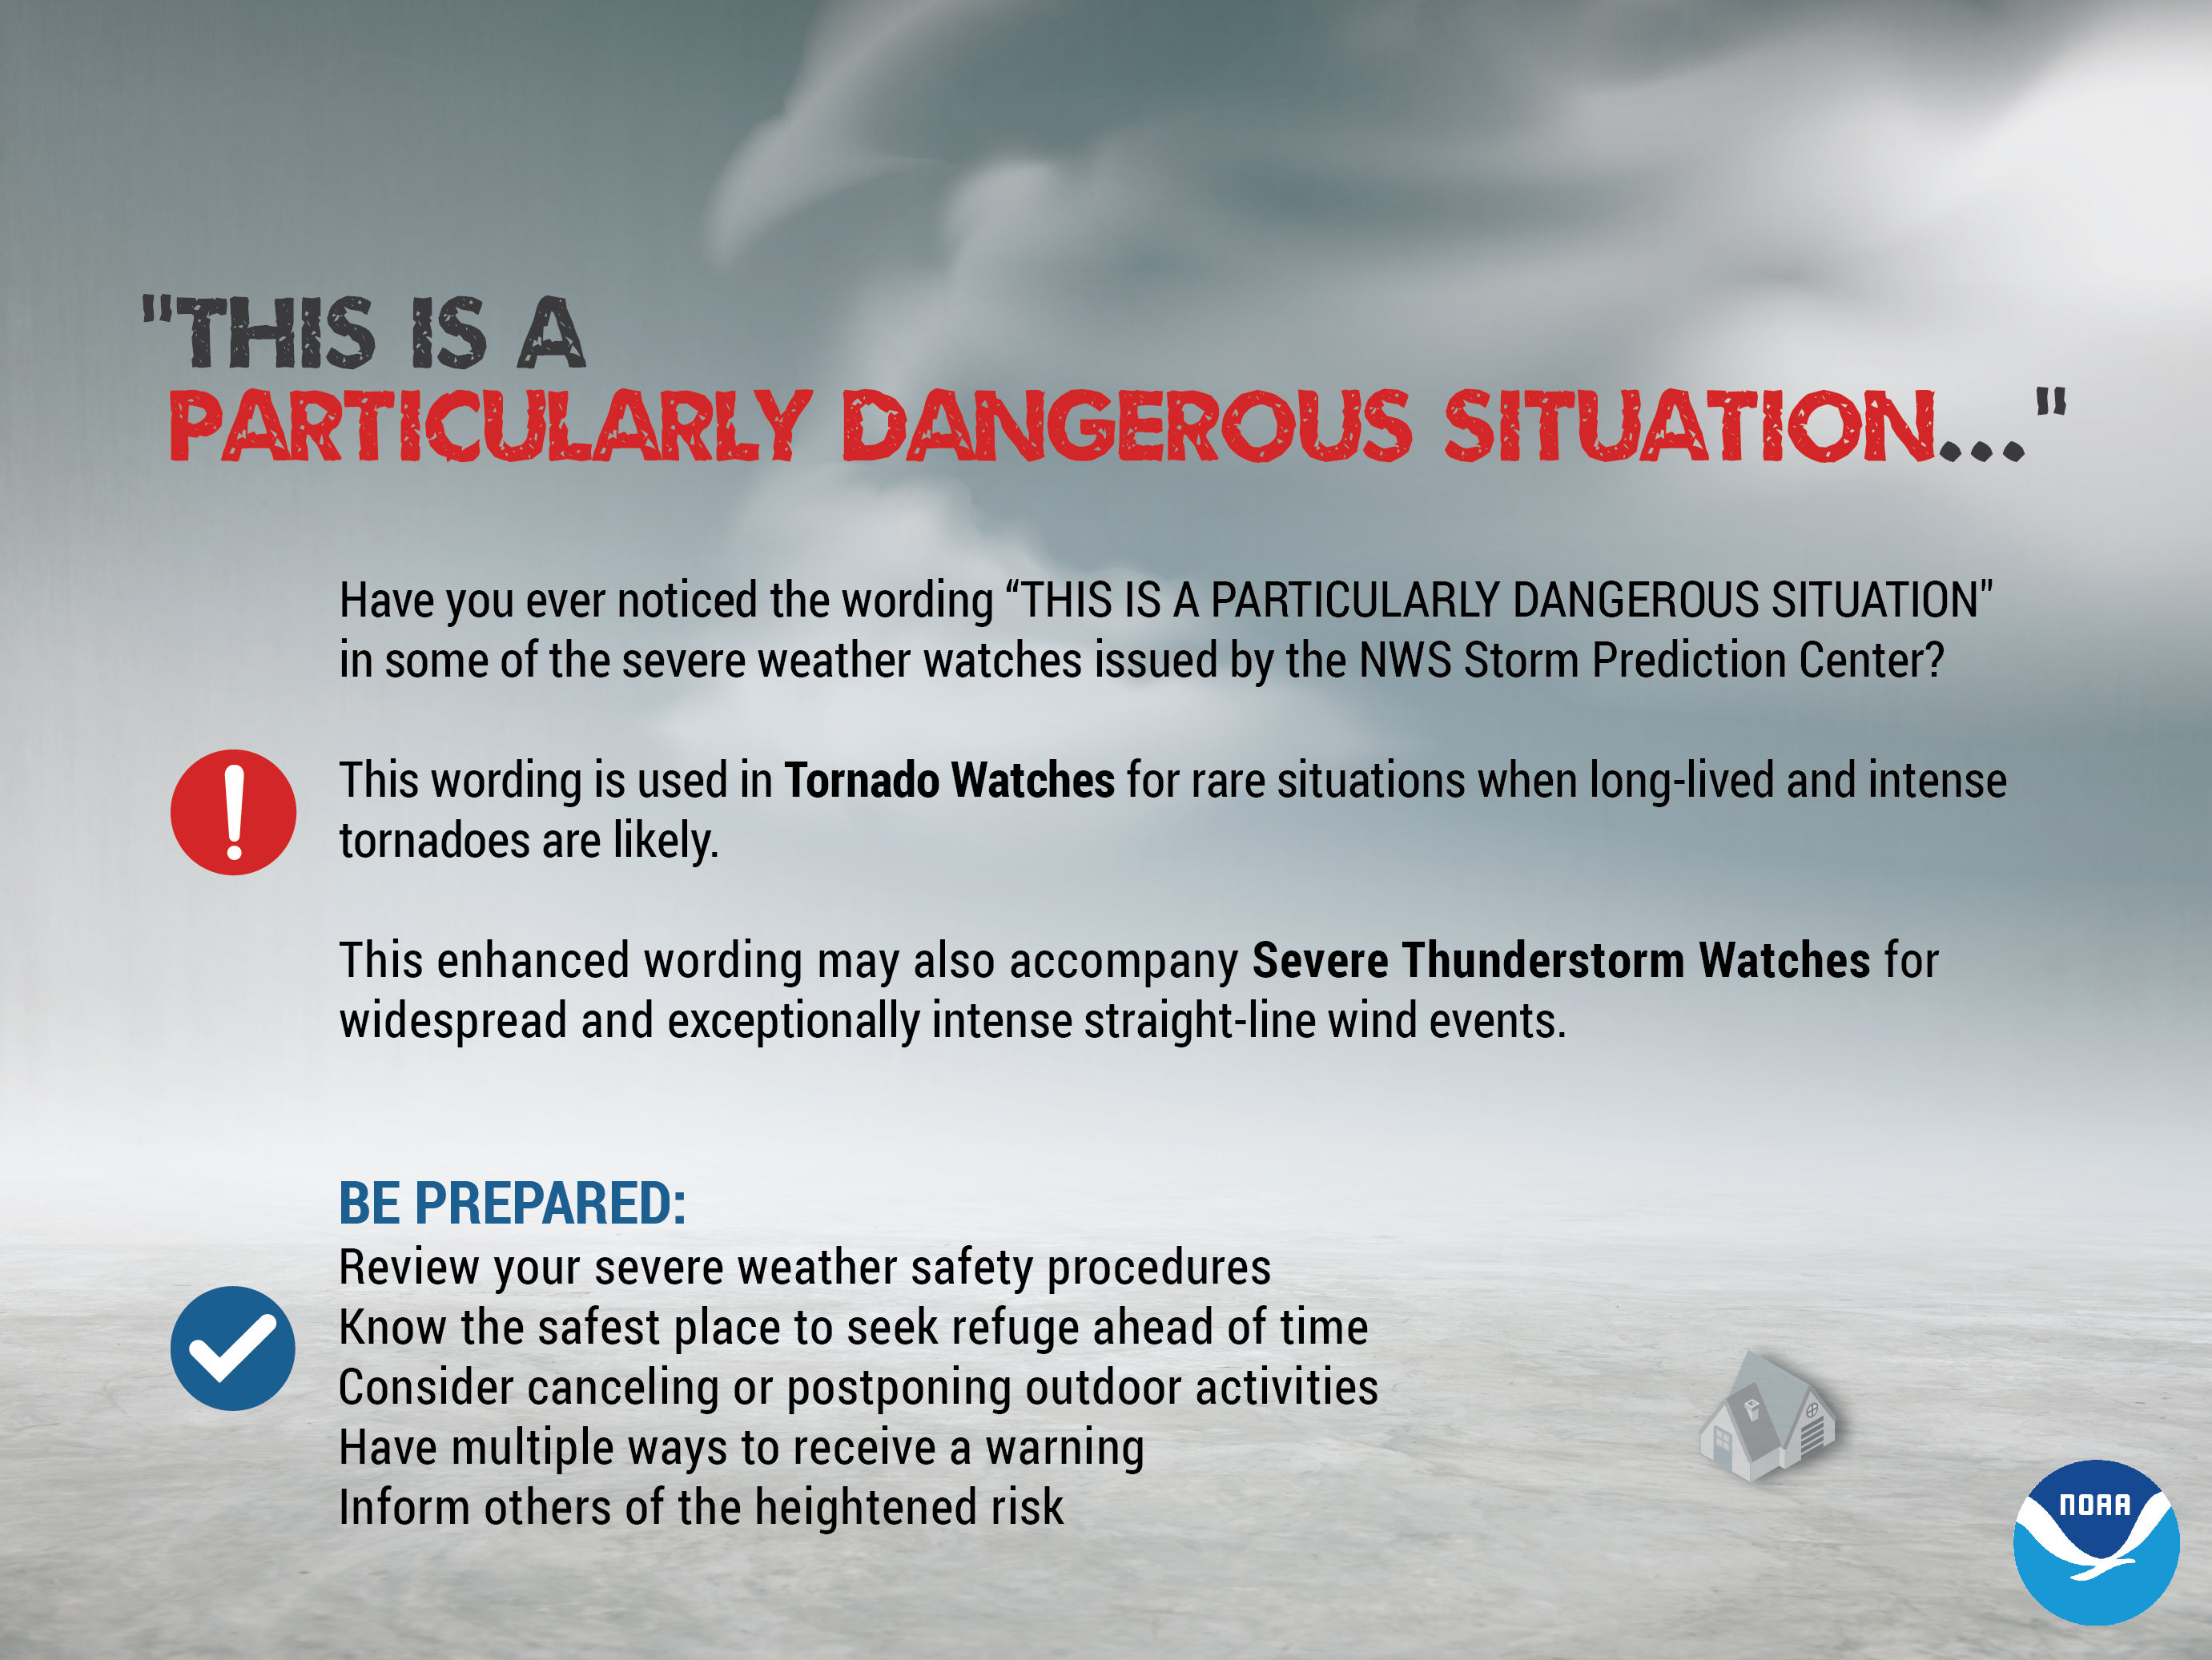 TORNADOES AND ROAD SAFETY. 1) What To Do: Get off the road. The best option is to drive to a designated shelter, basement or safe room. The next best option is a small, windowless room or hallway on the lowest floor of a sturdy building. 2) What No To Do: Do not seek refuge in a vehicle, outside or under an overpass. A highway overpass does not provide safety from a tornado. Do not seek shelter under an overpass or a tree. This puts you at greater risk of being killed or seriously injured by flying debris from the powerful tornadic winds.